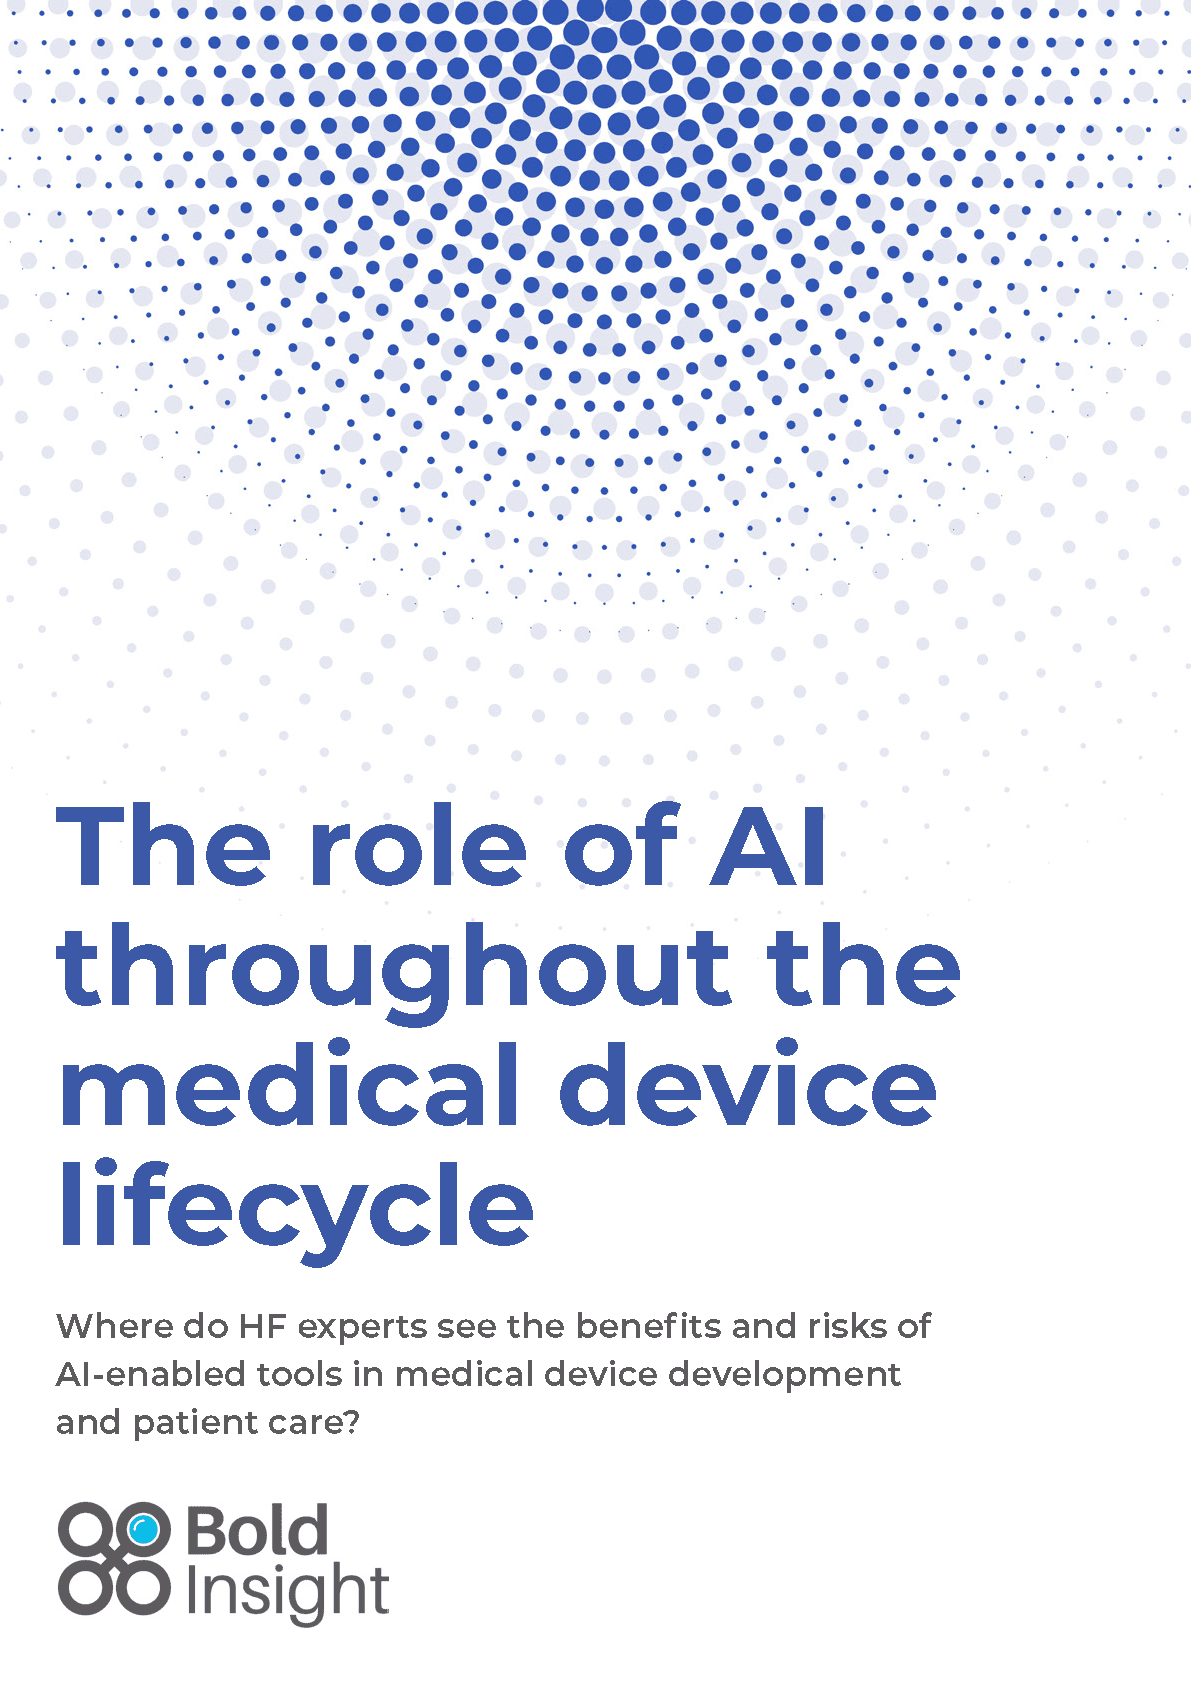 The role of AI throughout the medical device lifecycle 